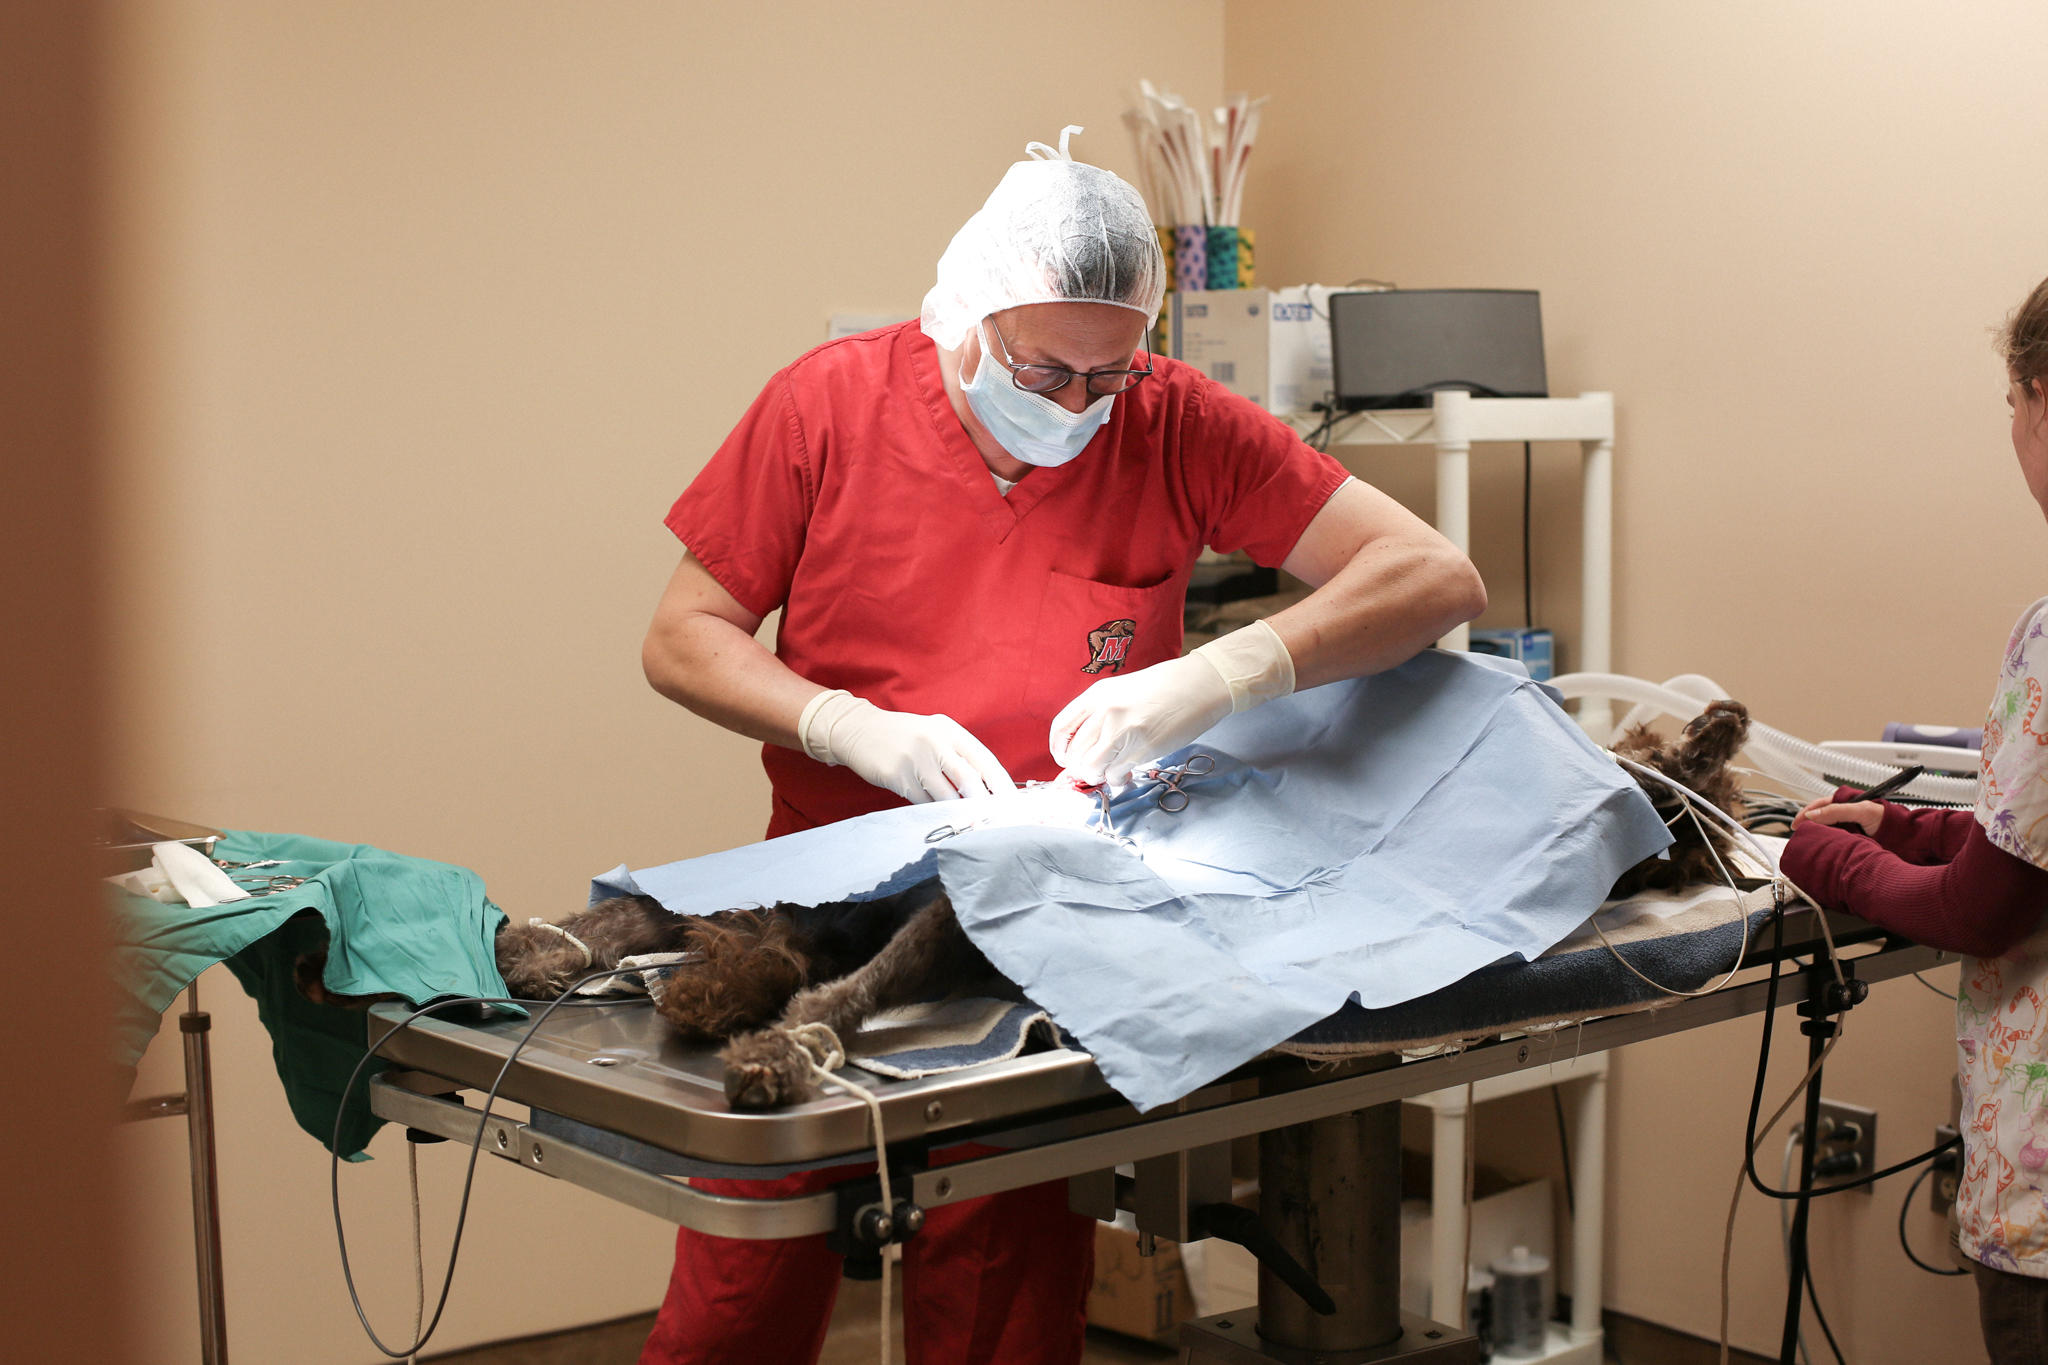 The medical team at Stevenson Village Veterinary Hospital is highly experienced in a wide range of surgical procedures, including spay/neuter procedures, dental surgery, and so much more.